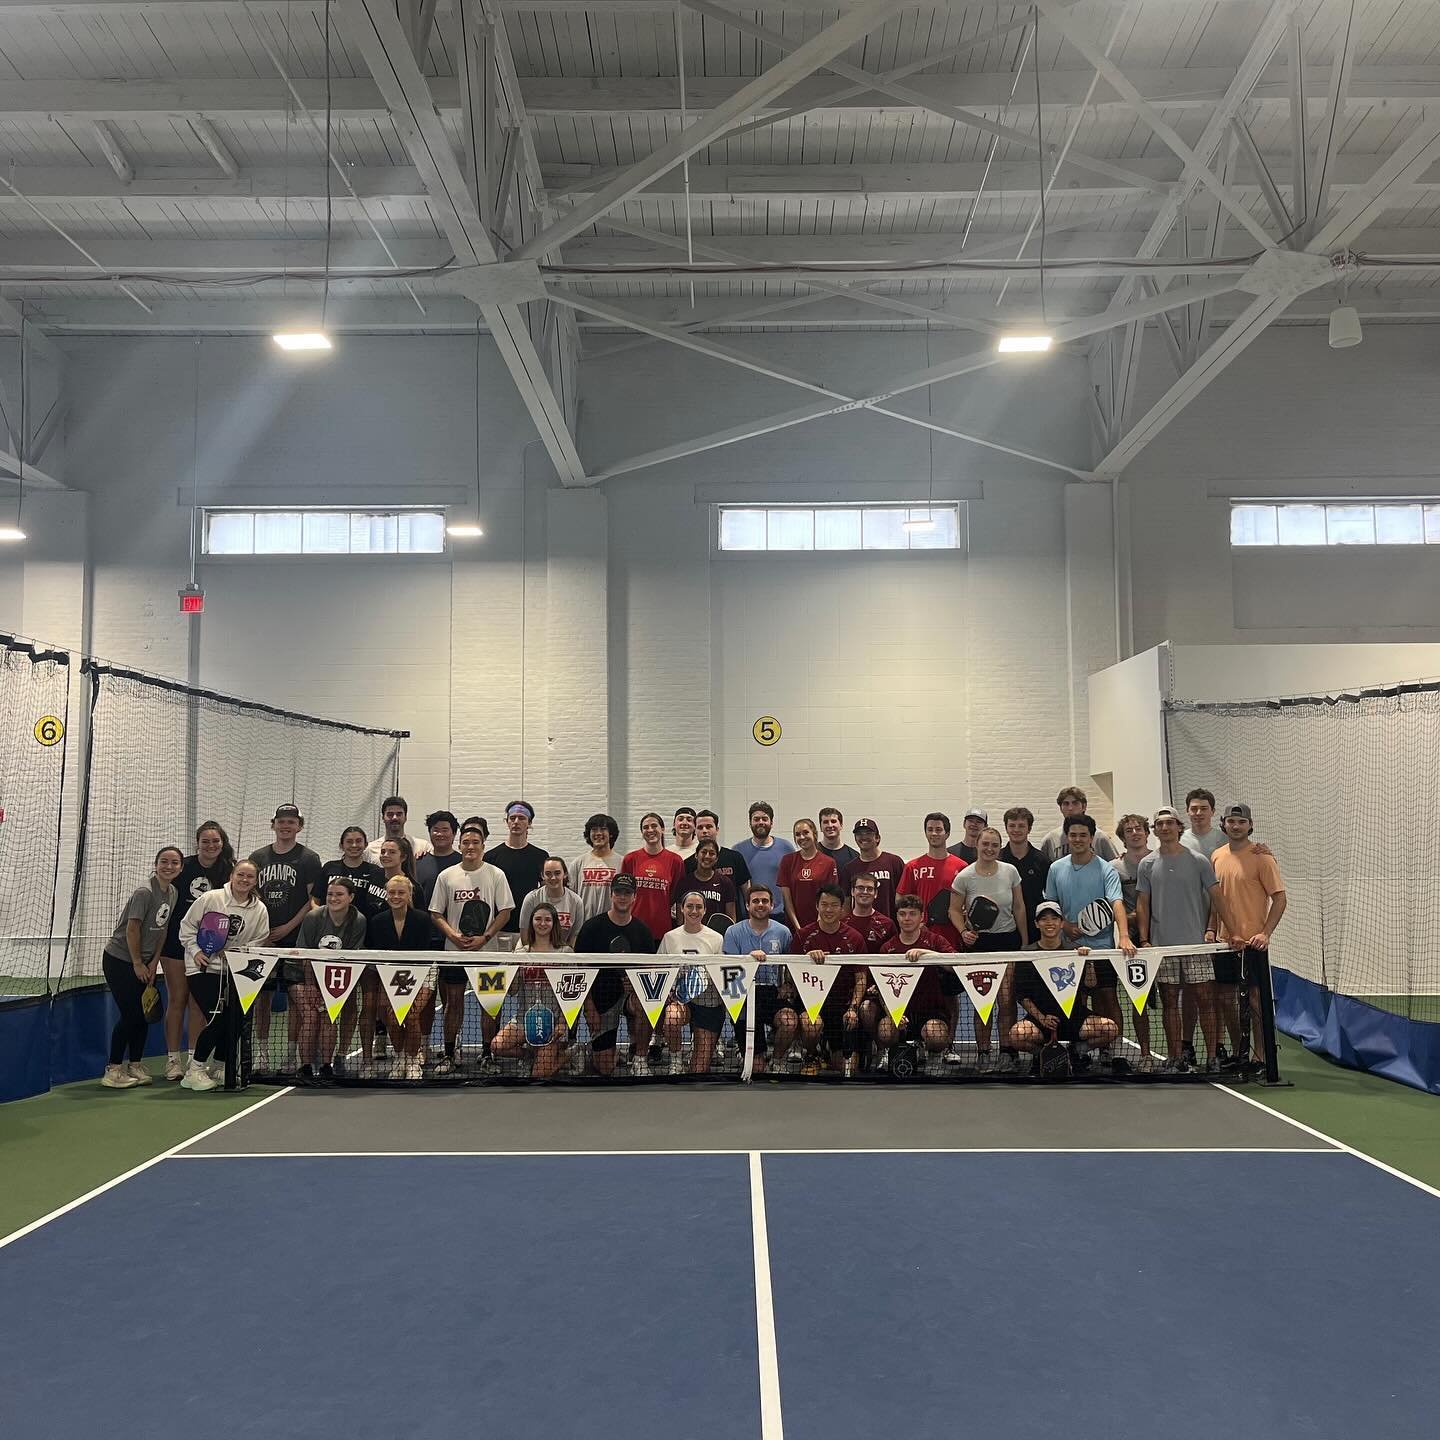 Our first ever Collegiate Battle tournament was a success!

A big thank you to all the schools who came out and played, and a big congratulations to URI for being our crowned champions, as well as to Harvard and UMass Amherst clinching the second and